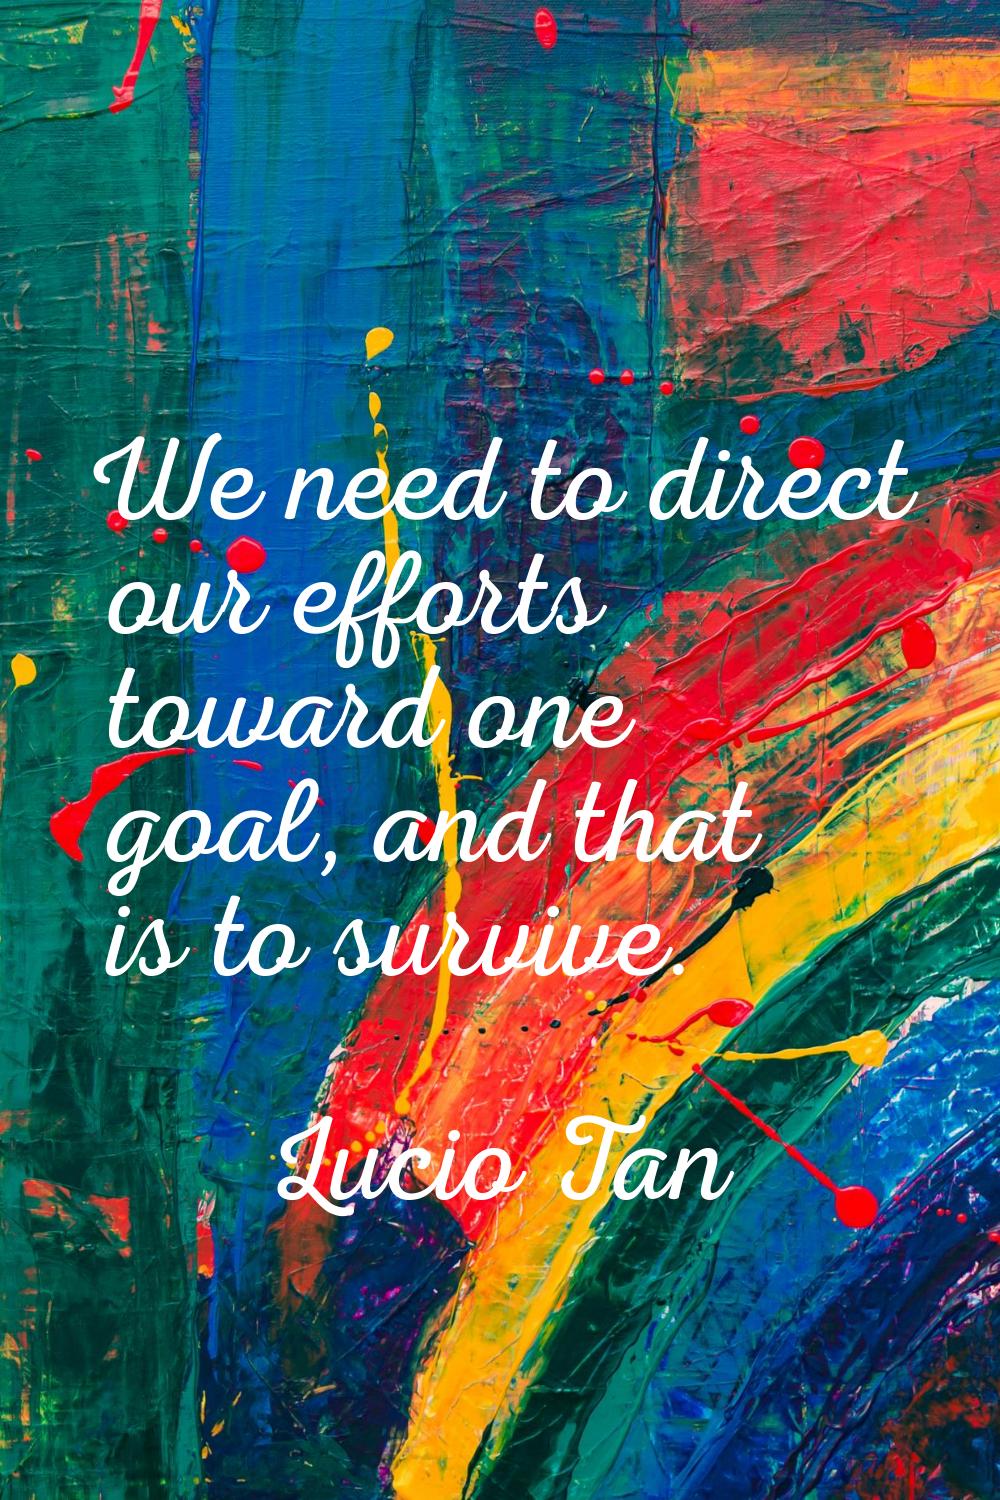 We need to direct our efforts toward one goal, and that is to survive.